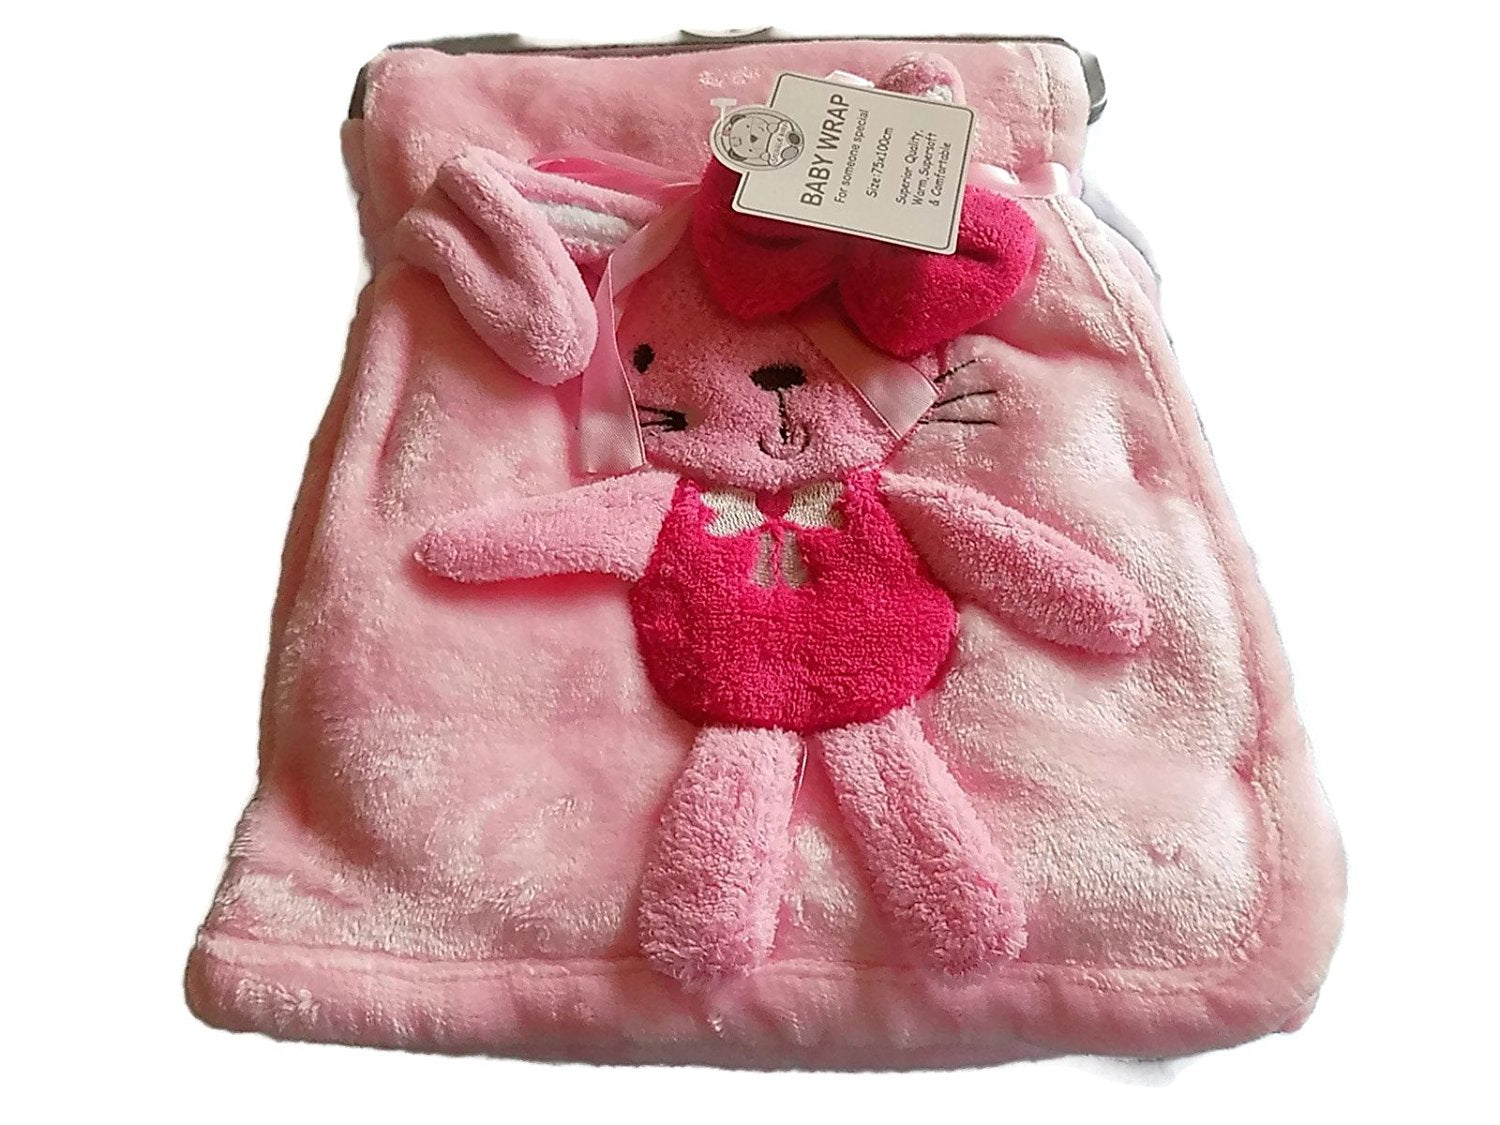 Baby 3d Wrap/Blanket - Bunny Color Pink 917 - hanrattycraftsgifts.co.uk